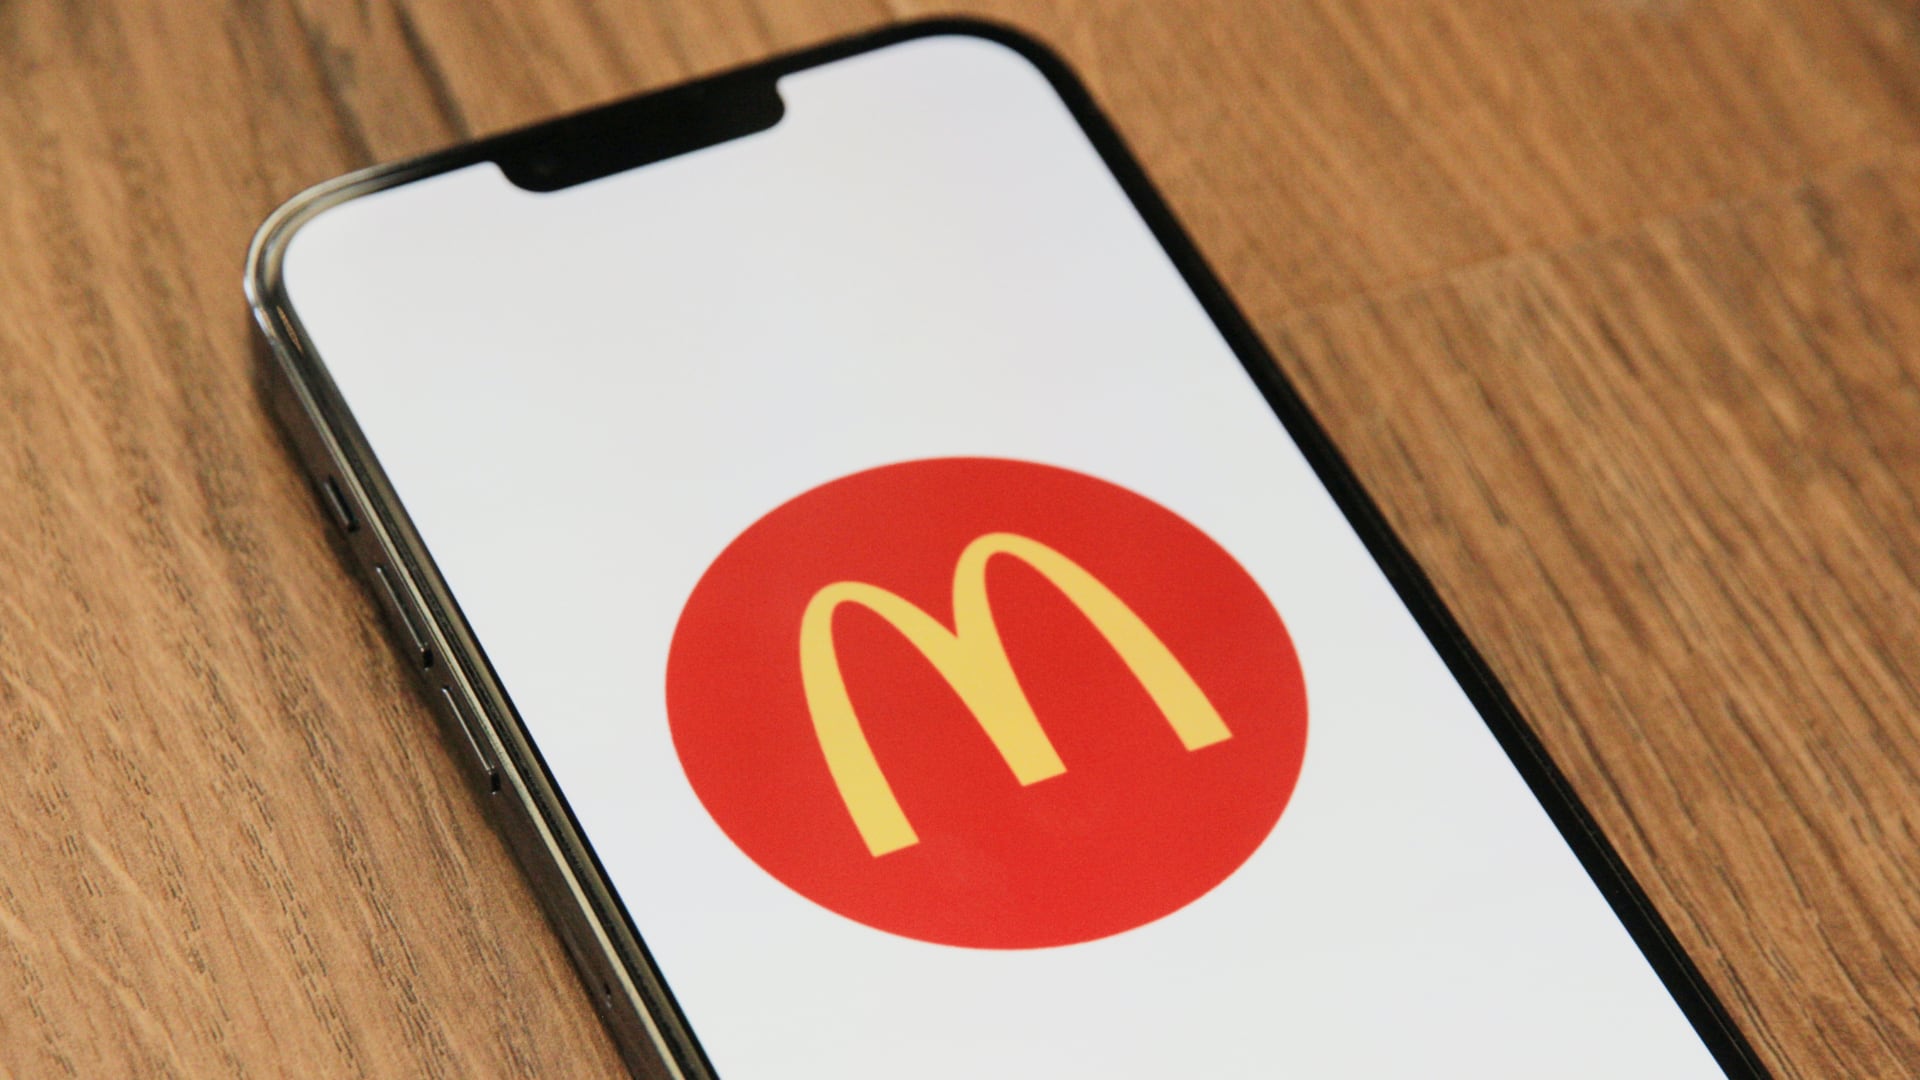 Apple Pay promotion offers six Chicken McNuggets for free with a $1 purchase